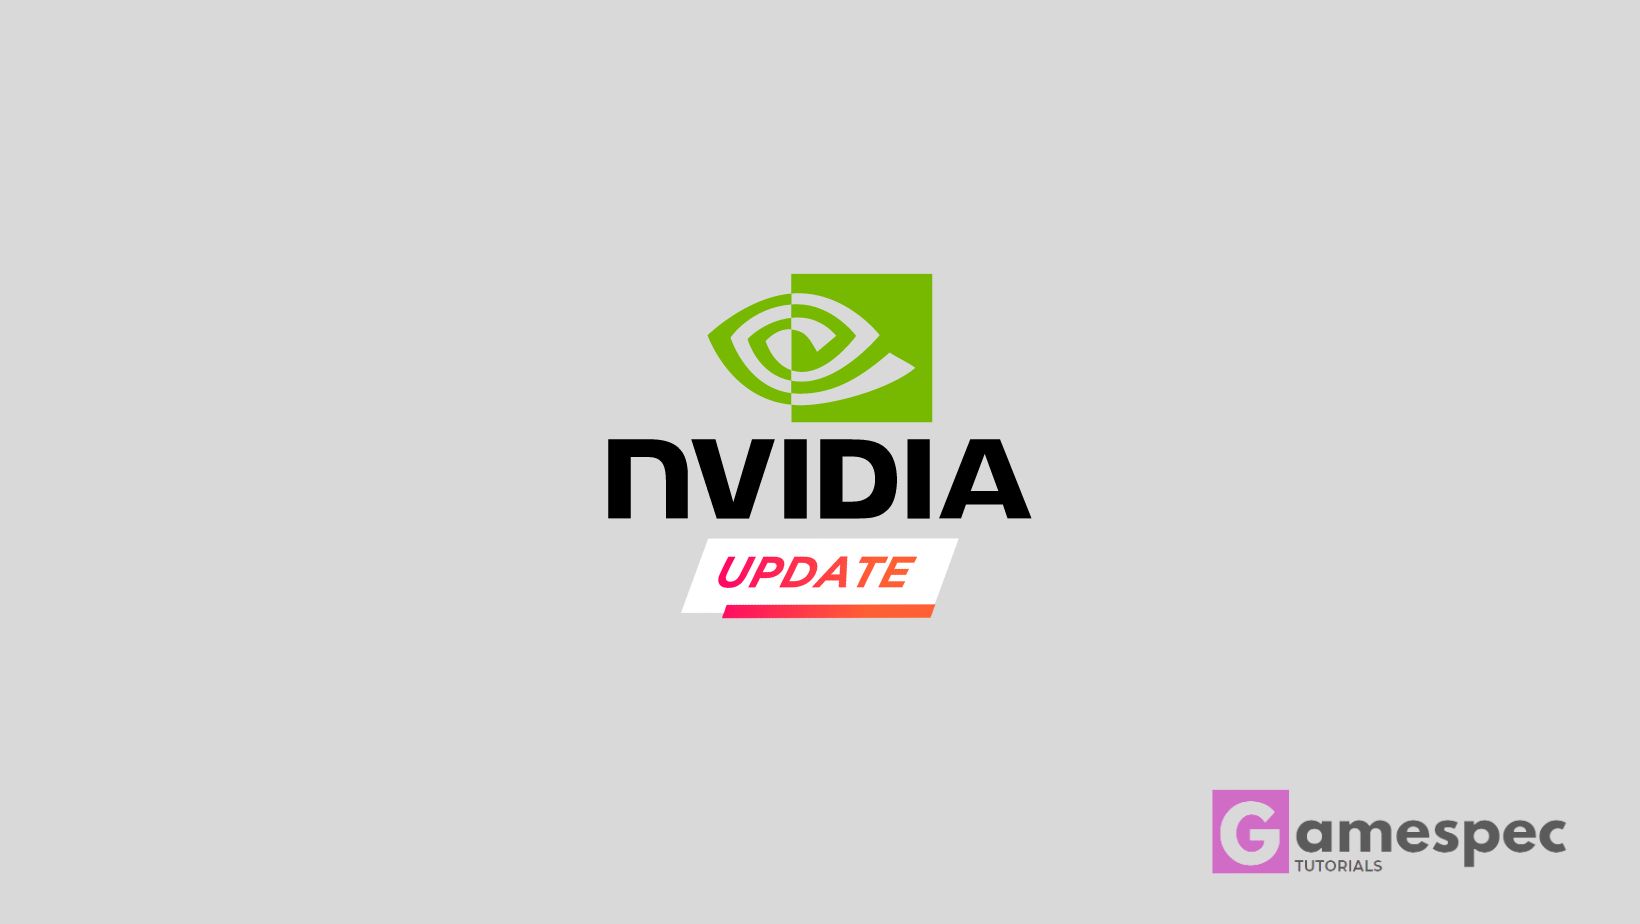 FIX The Installed Version of The Nvidia Graphics Driver Has Known Issues